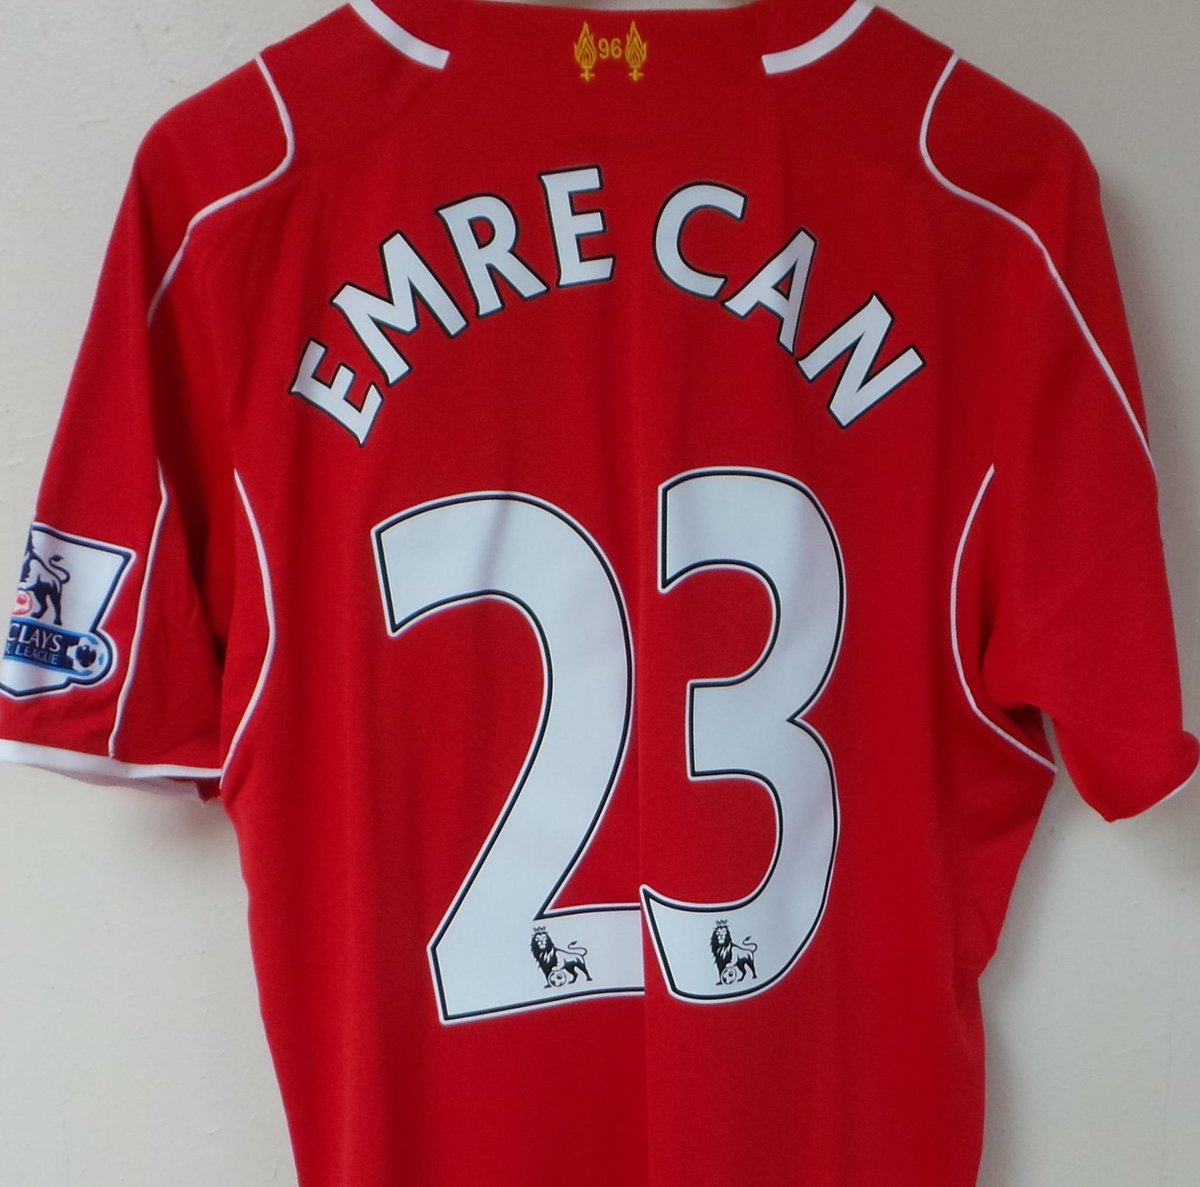 emre can jersey number